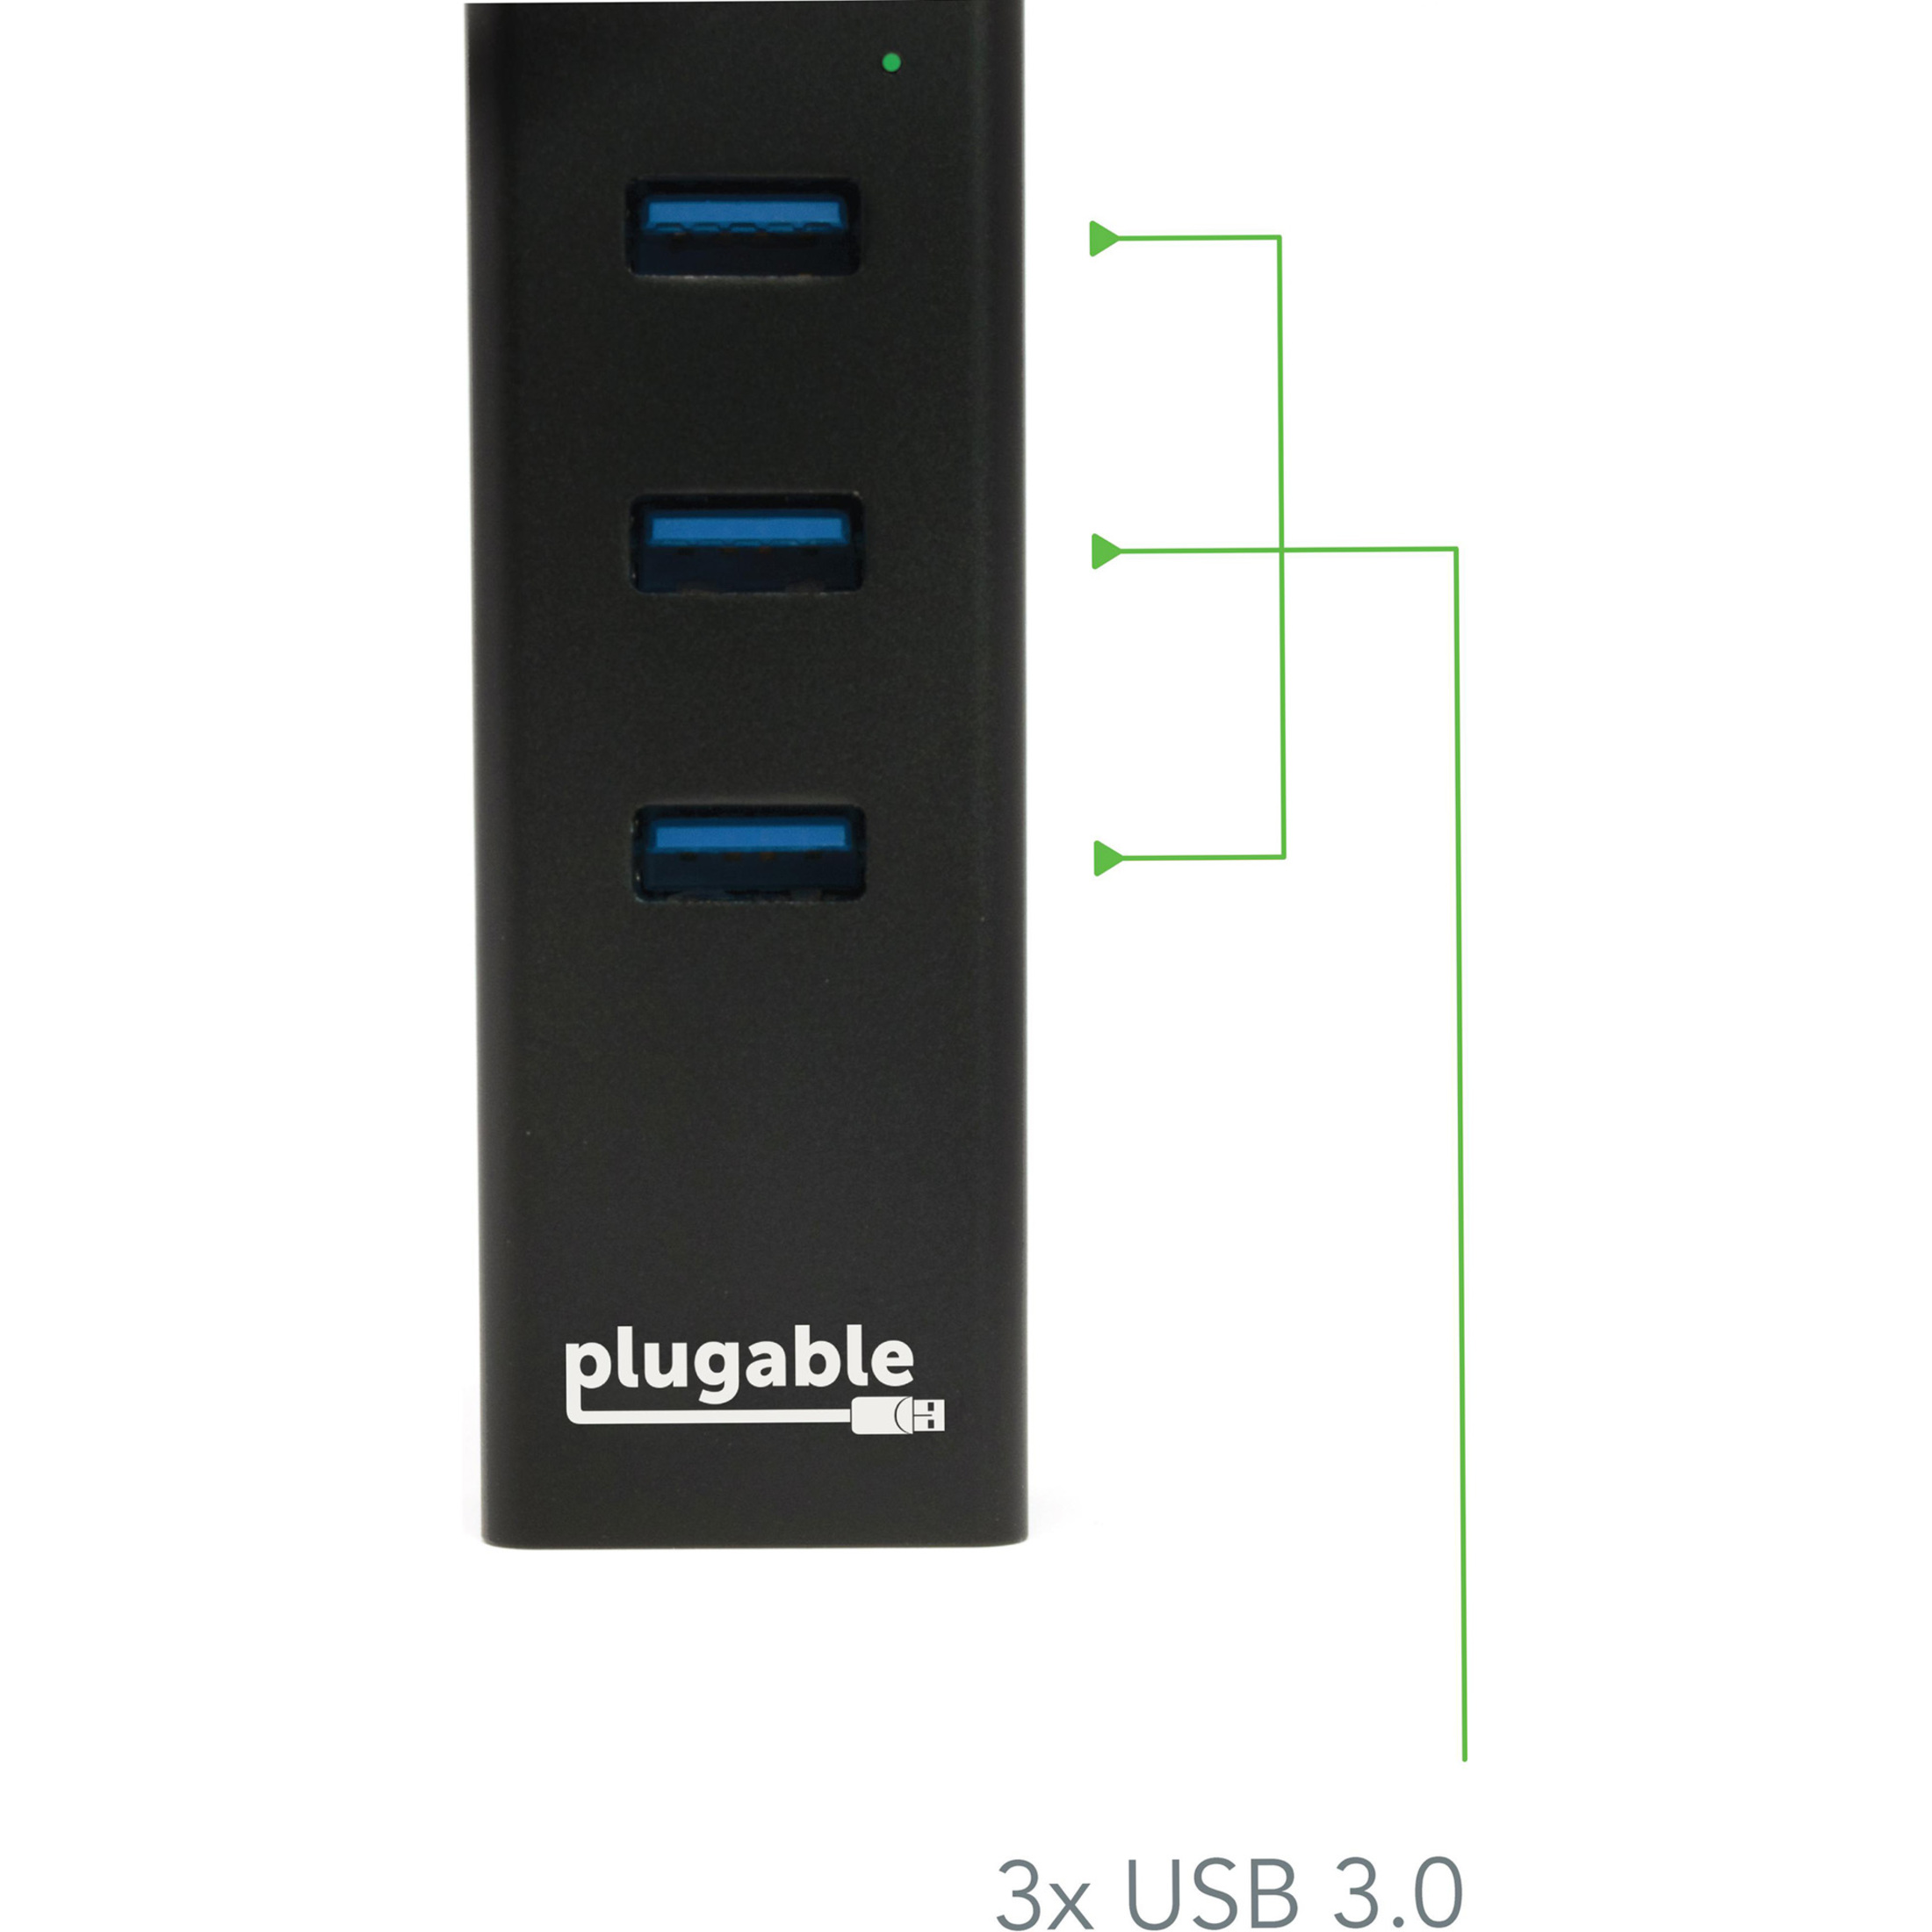 Plugable USB Hub with Ethernet, 3 port USB 3.0 Bus Powered Hub with Gigabit Ethernet Compatible with Windows, MacBook, Linux, Chrome OS, Includes USB C and USB 3.0 Cables - image 3 of 7